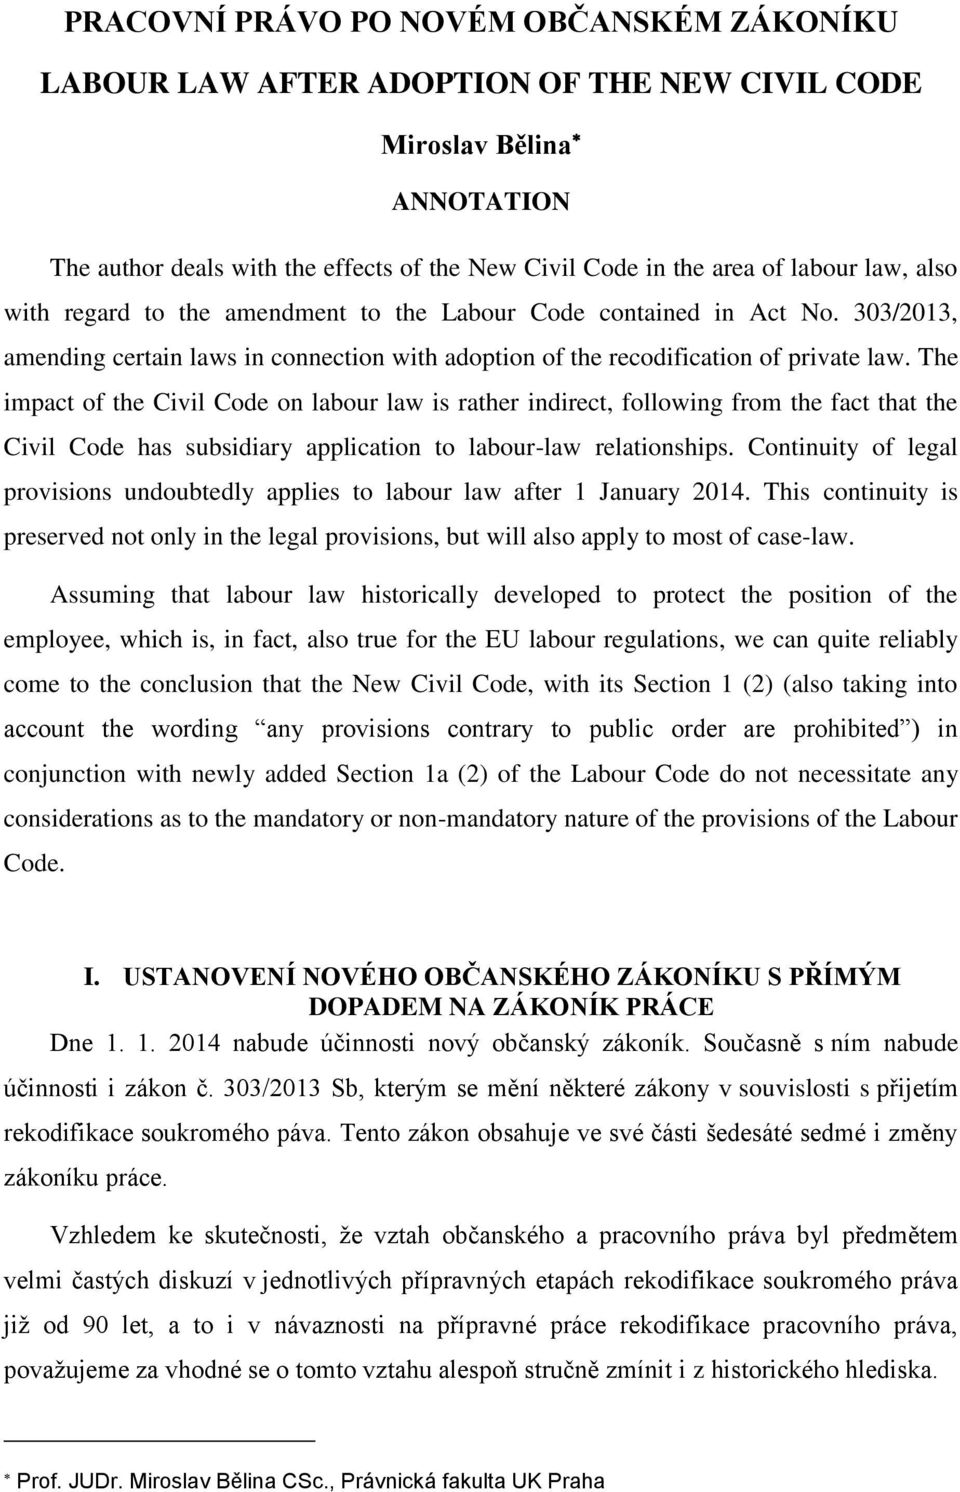 The impact of the Civil Code on labour law is rather indirect, following from the fact that the Civil Code has subsidiary application to labour-law relationships.